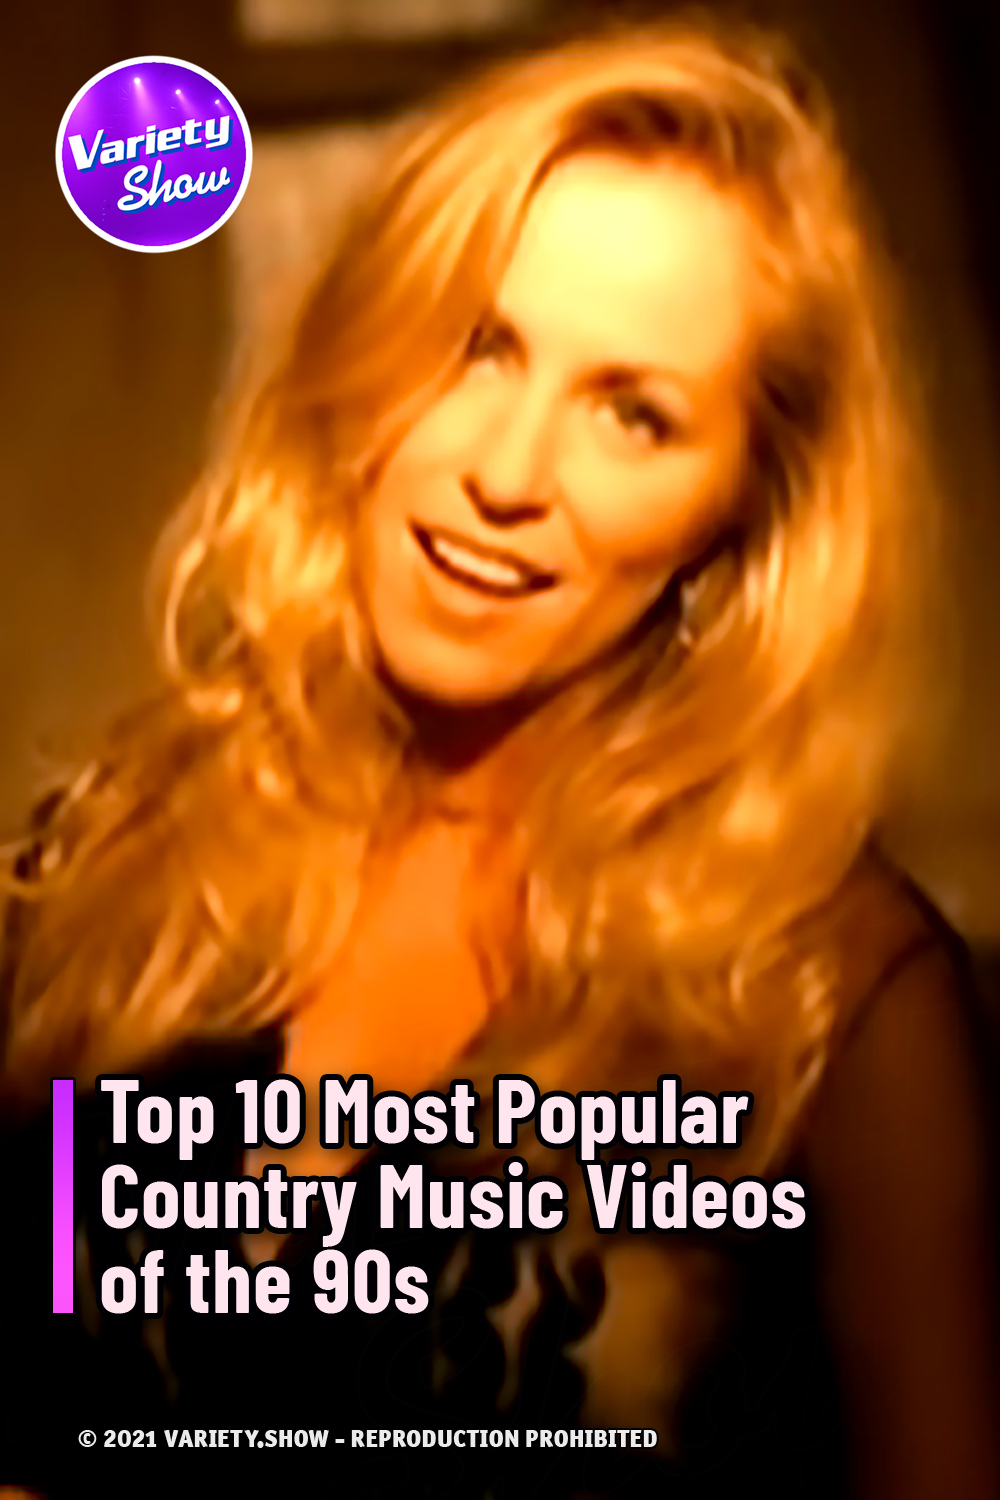 Top 10 Most Popular Country Music Videos of the 90s